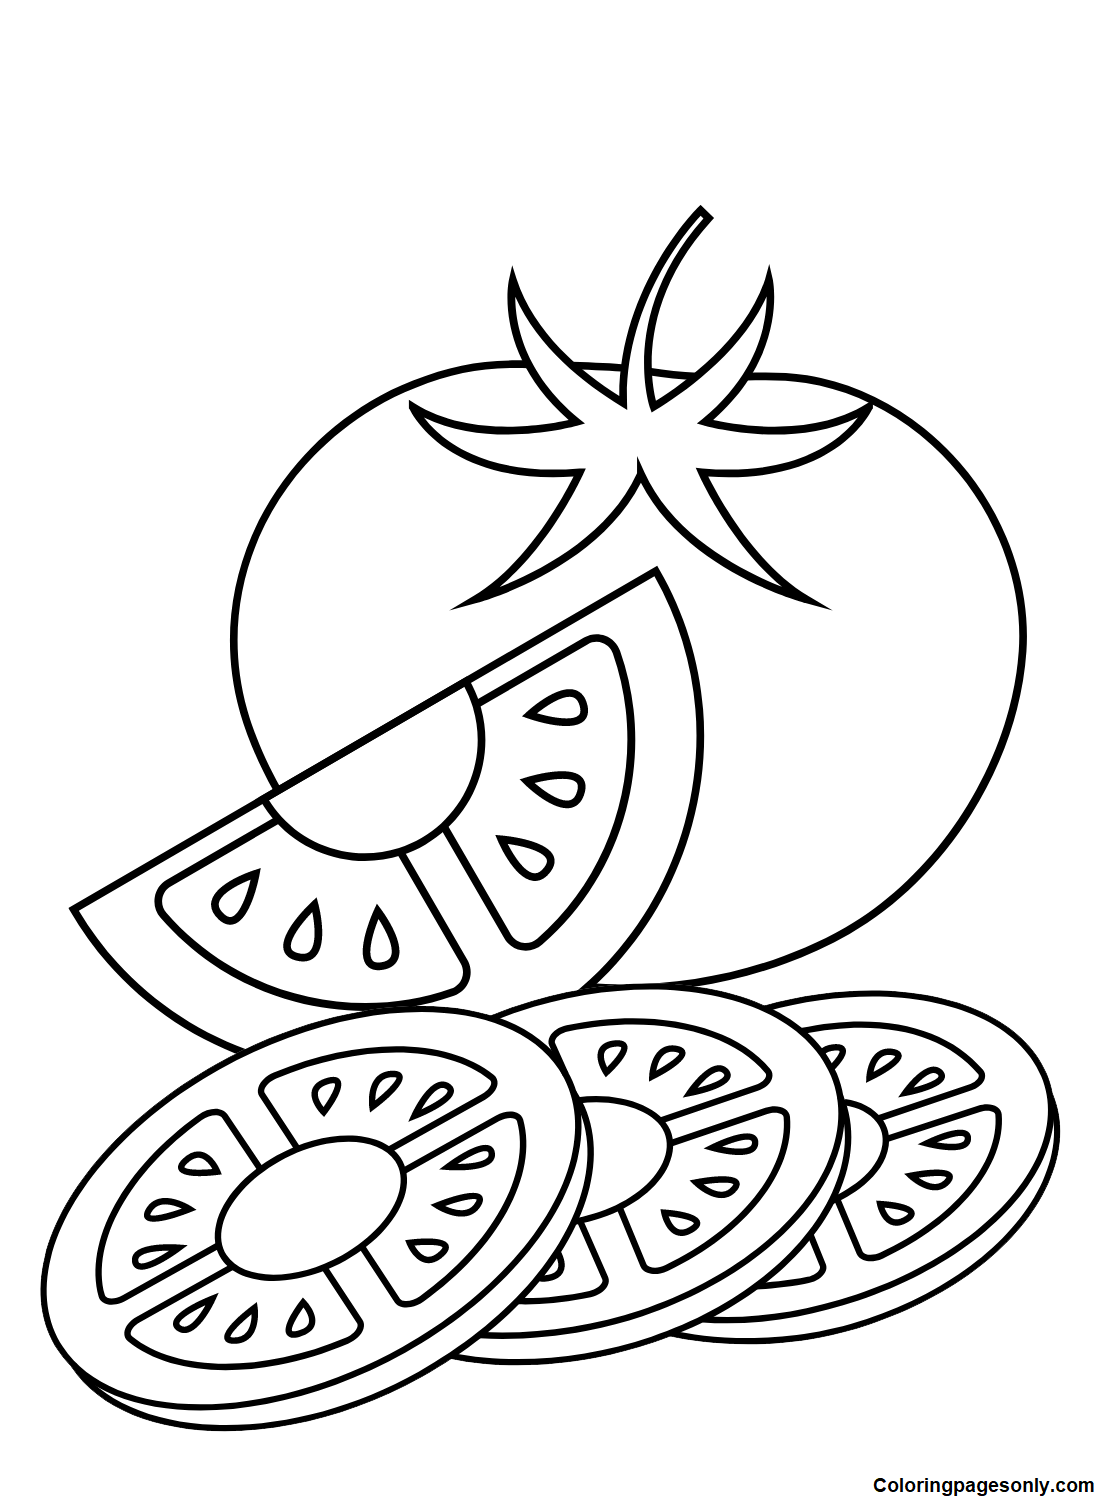 Club Sanwich with Tomato Coloring Page